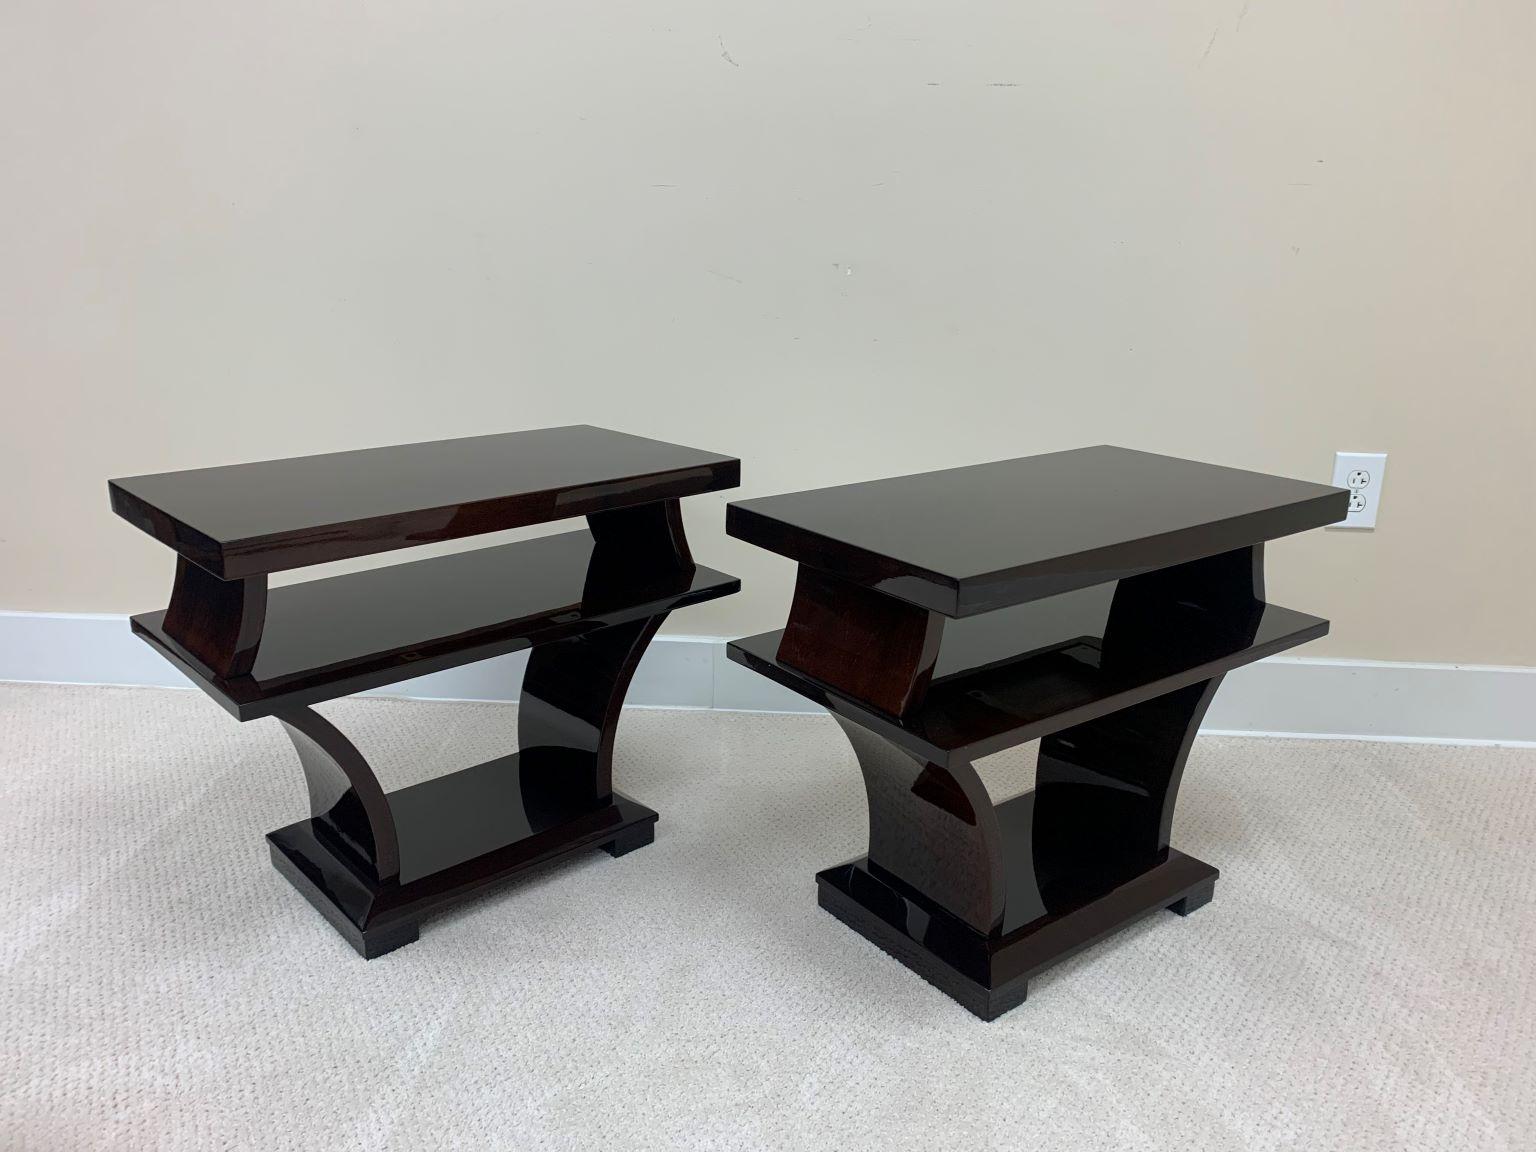 Pair of Art Deco Side Tables, Streamline American Modern  Circa 1940’s For Sale 3